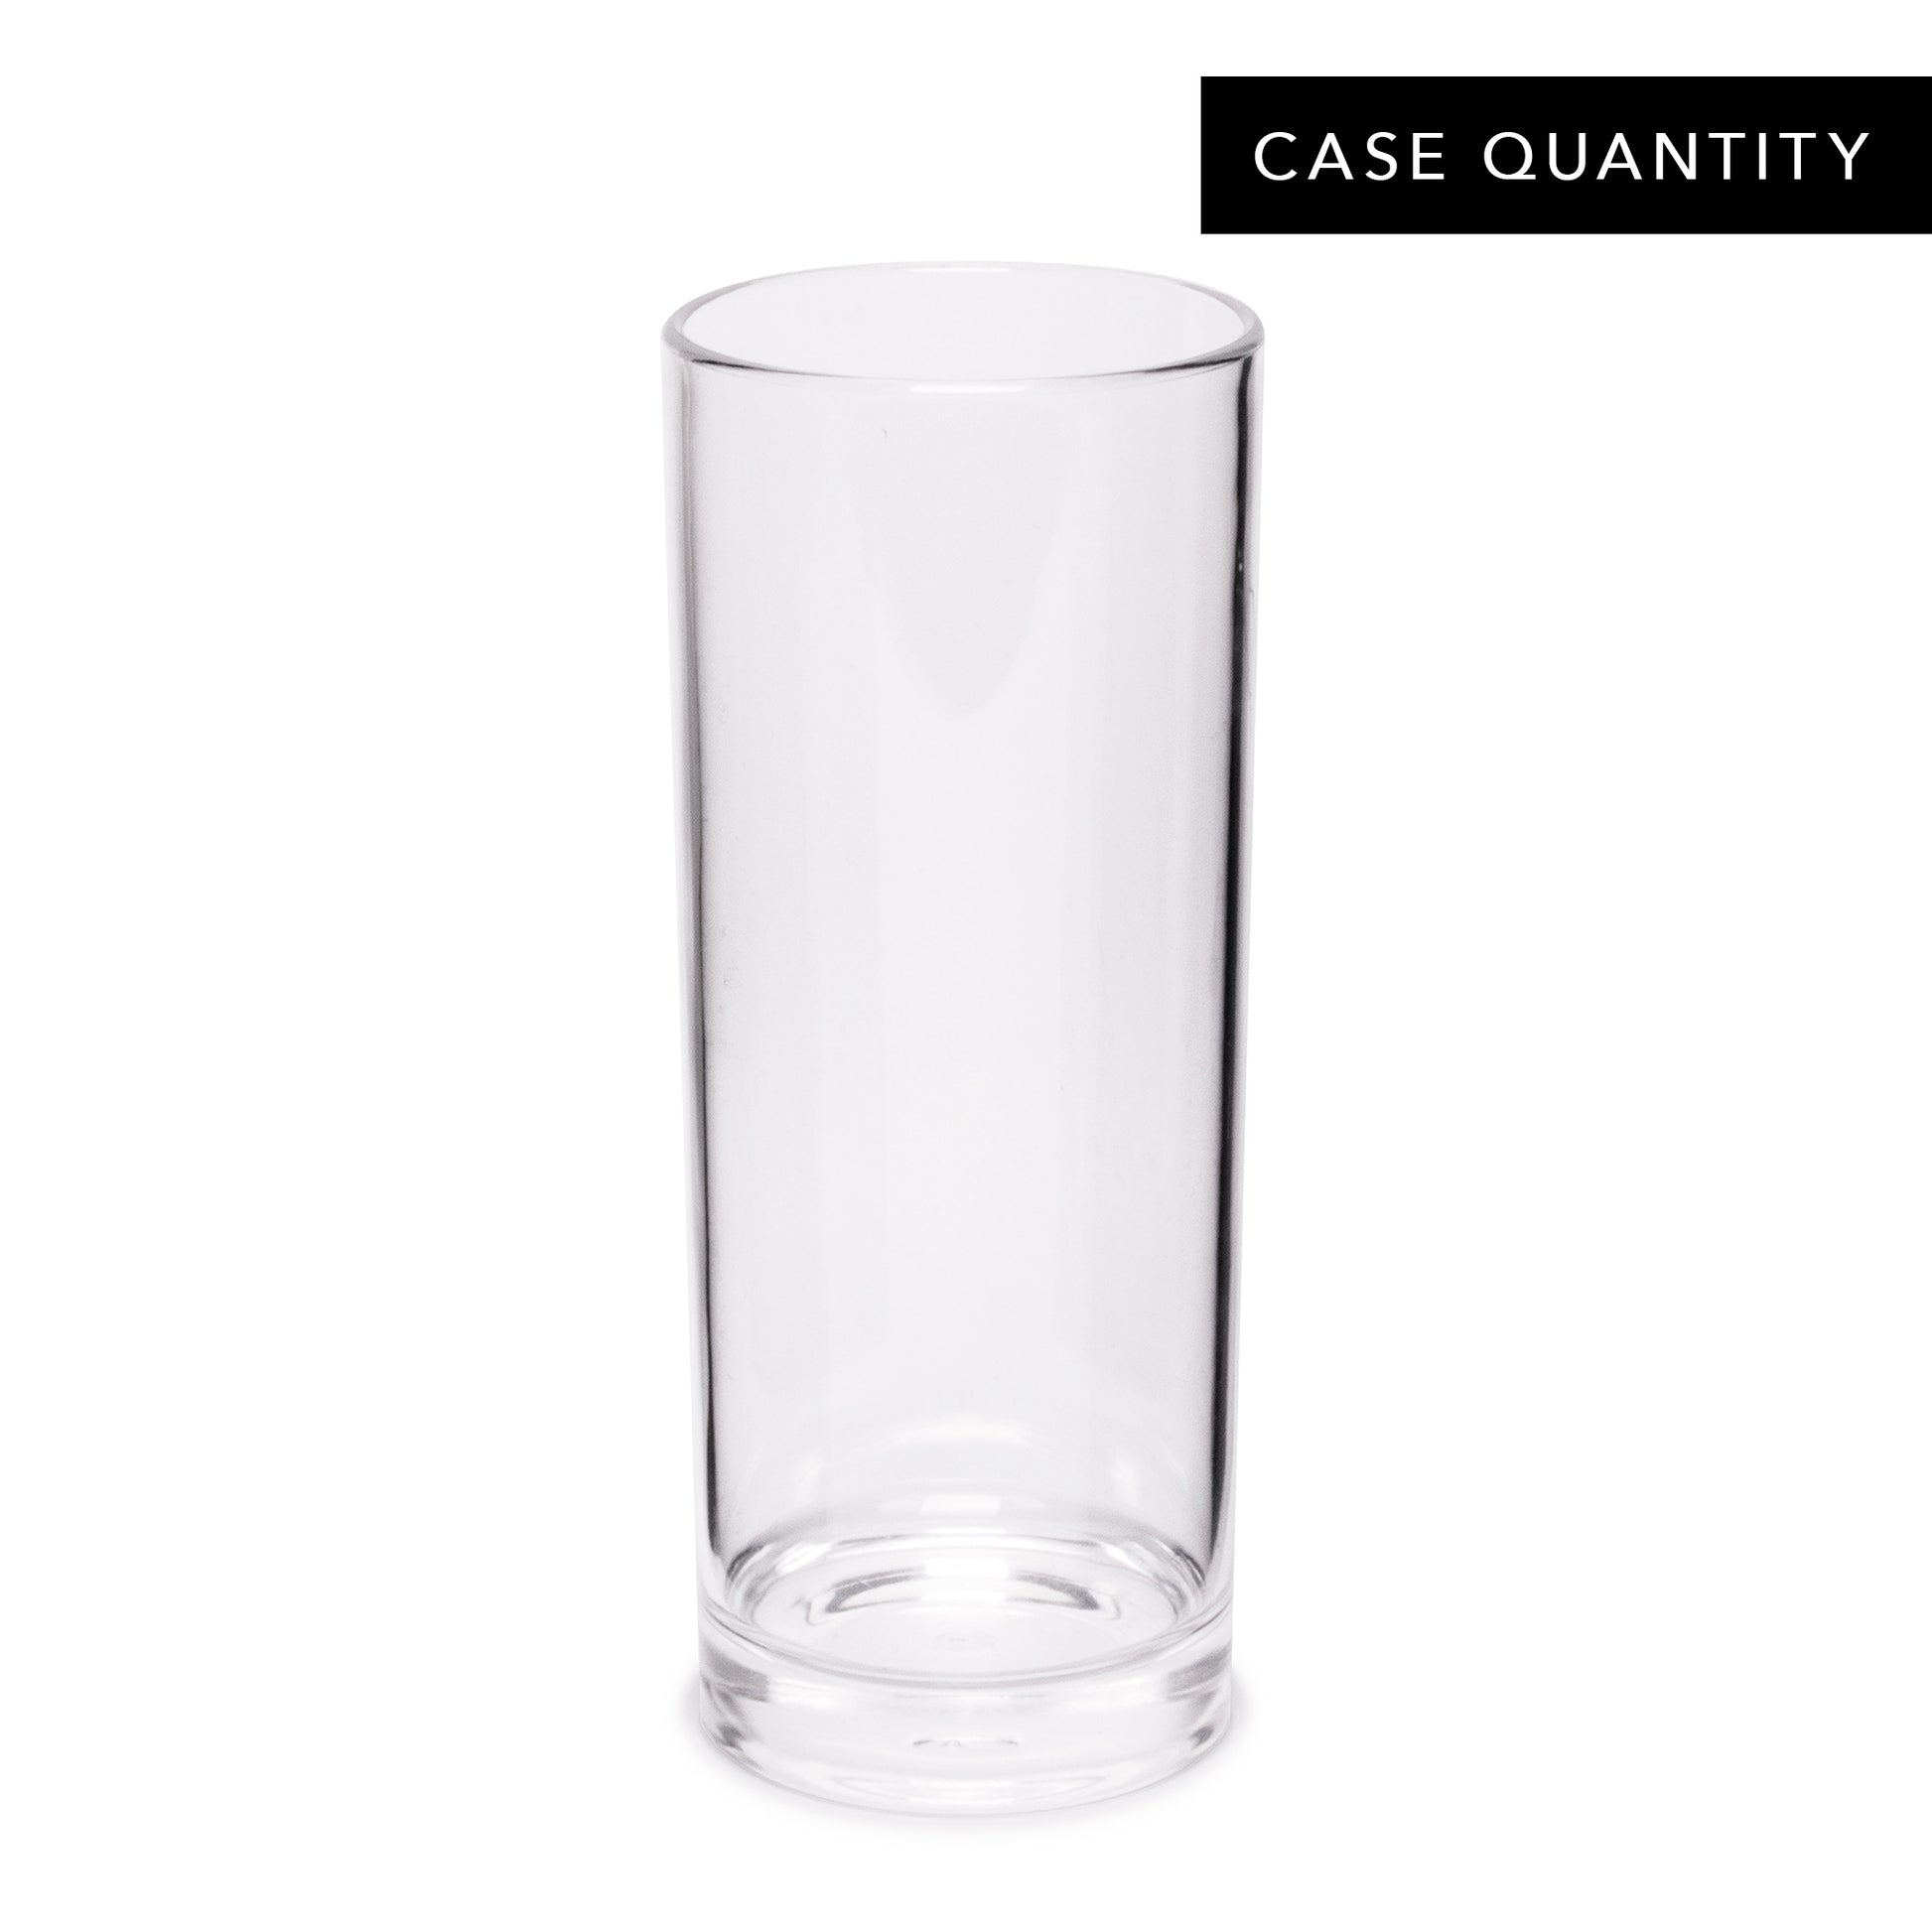 BUSWELL® ACRYLIC COLLINS GLASS – 12oz (360ml) / CASE OF 24